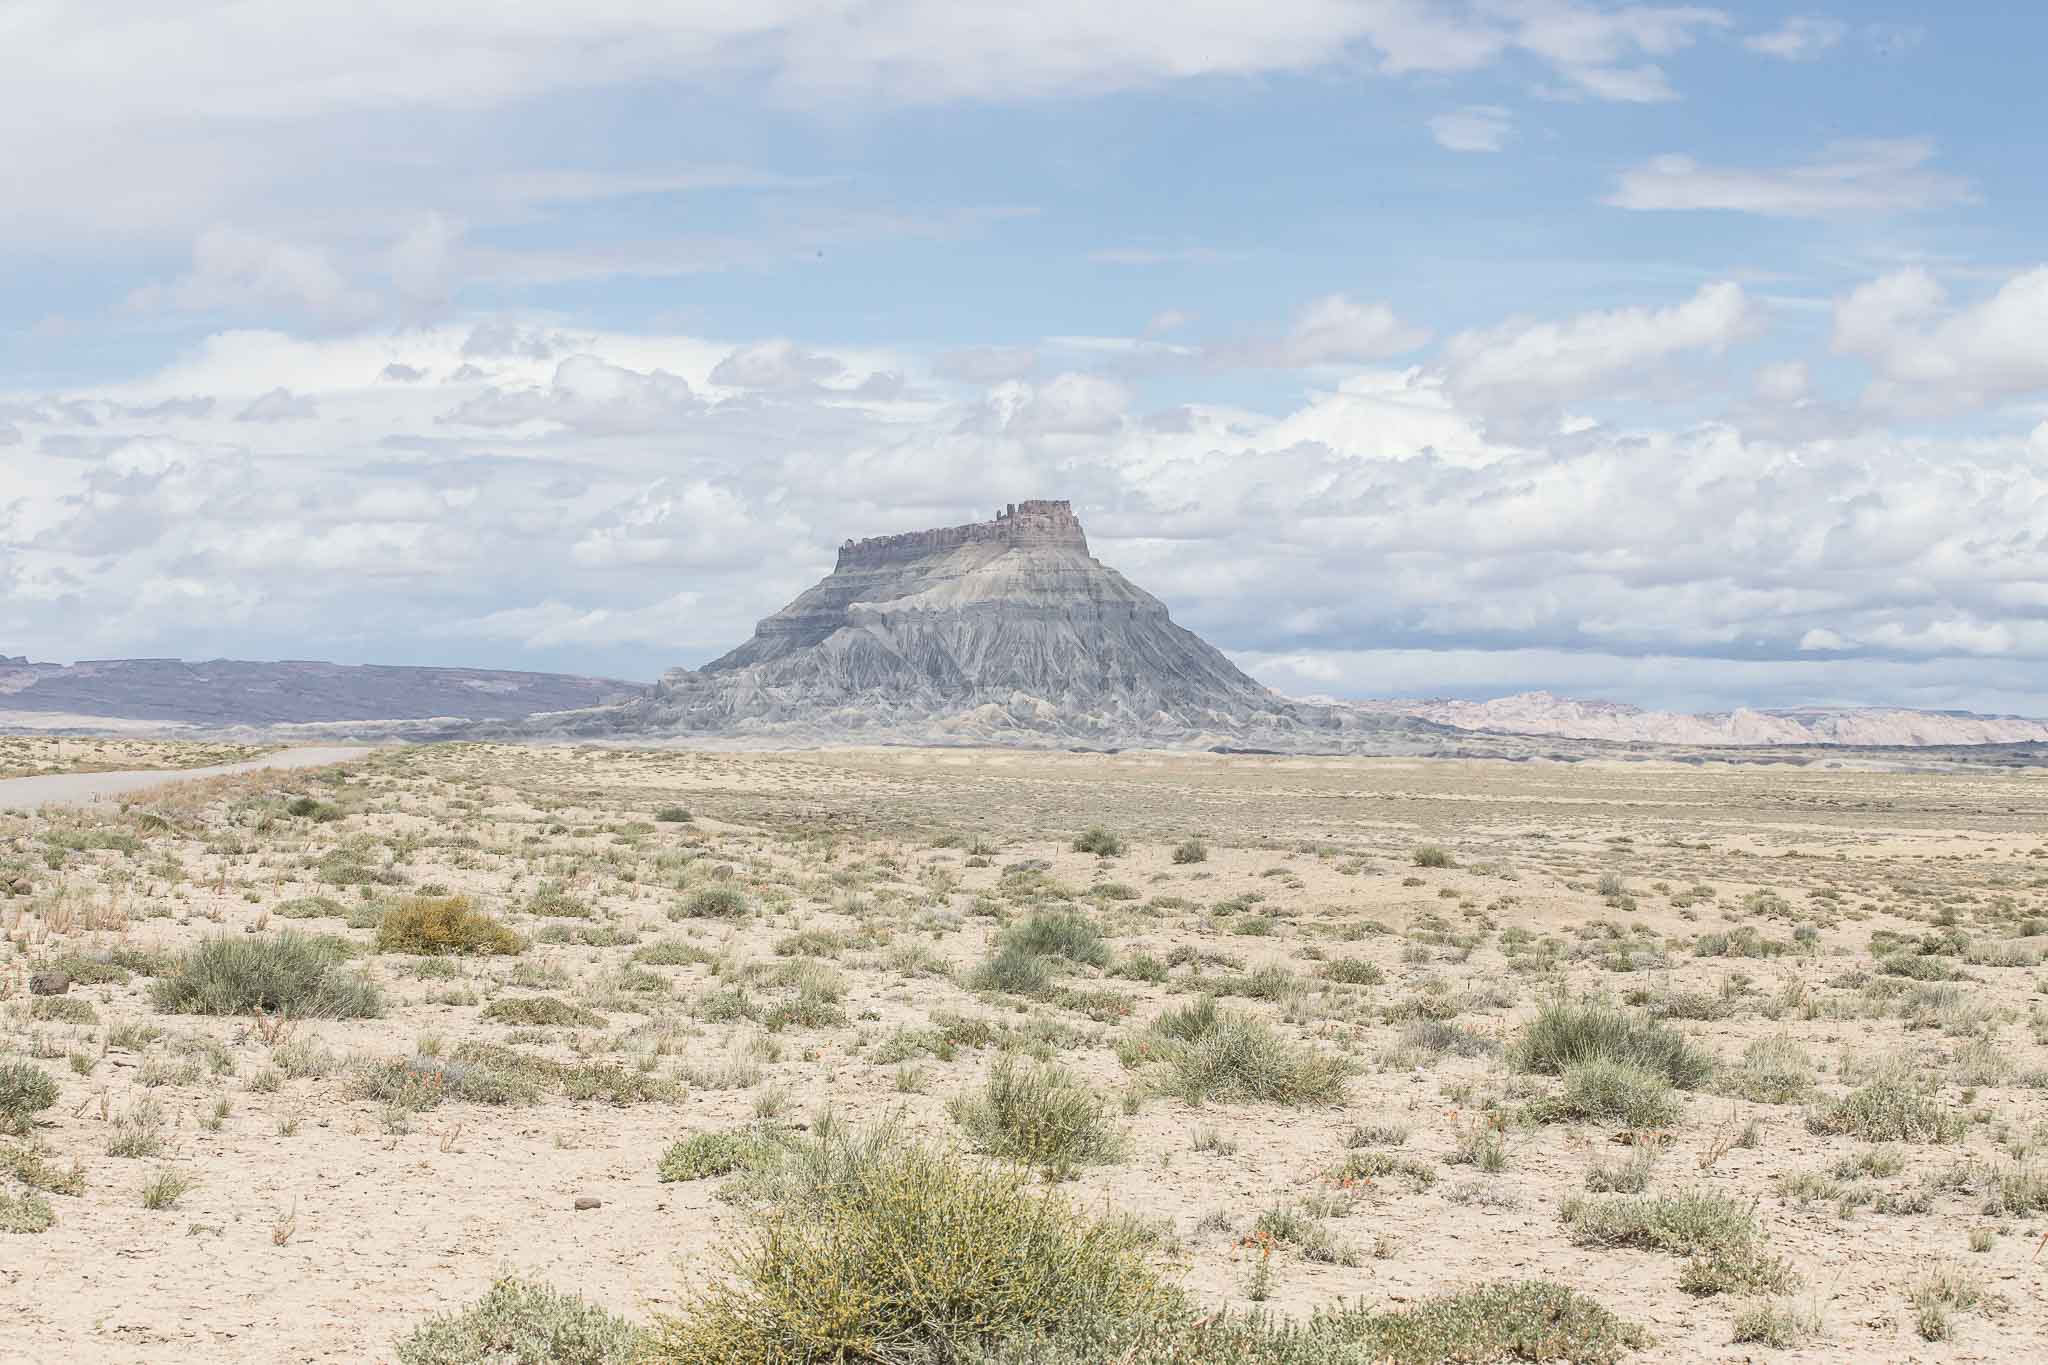 Factory Butte, Caineville Badlands, Caineville UT, May 6, 2015